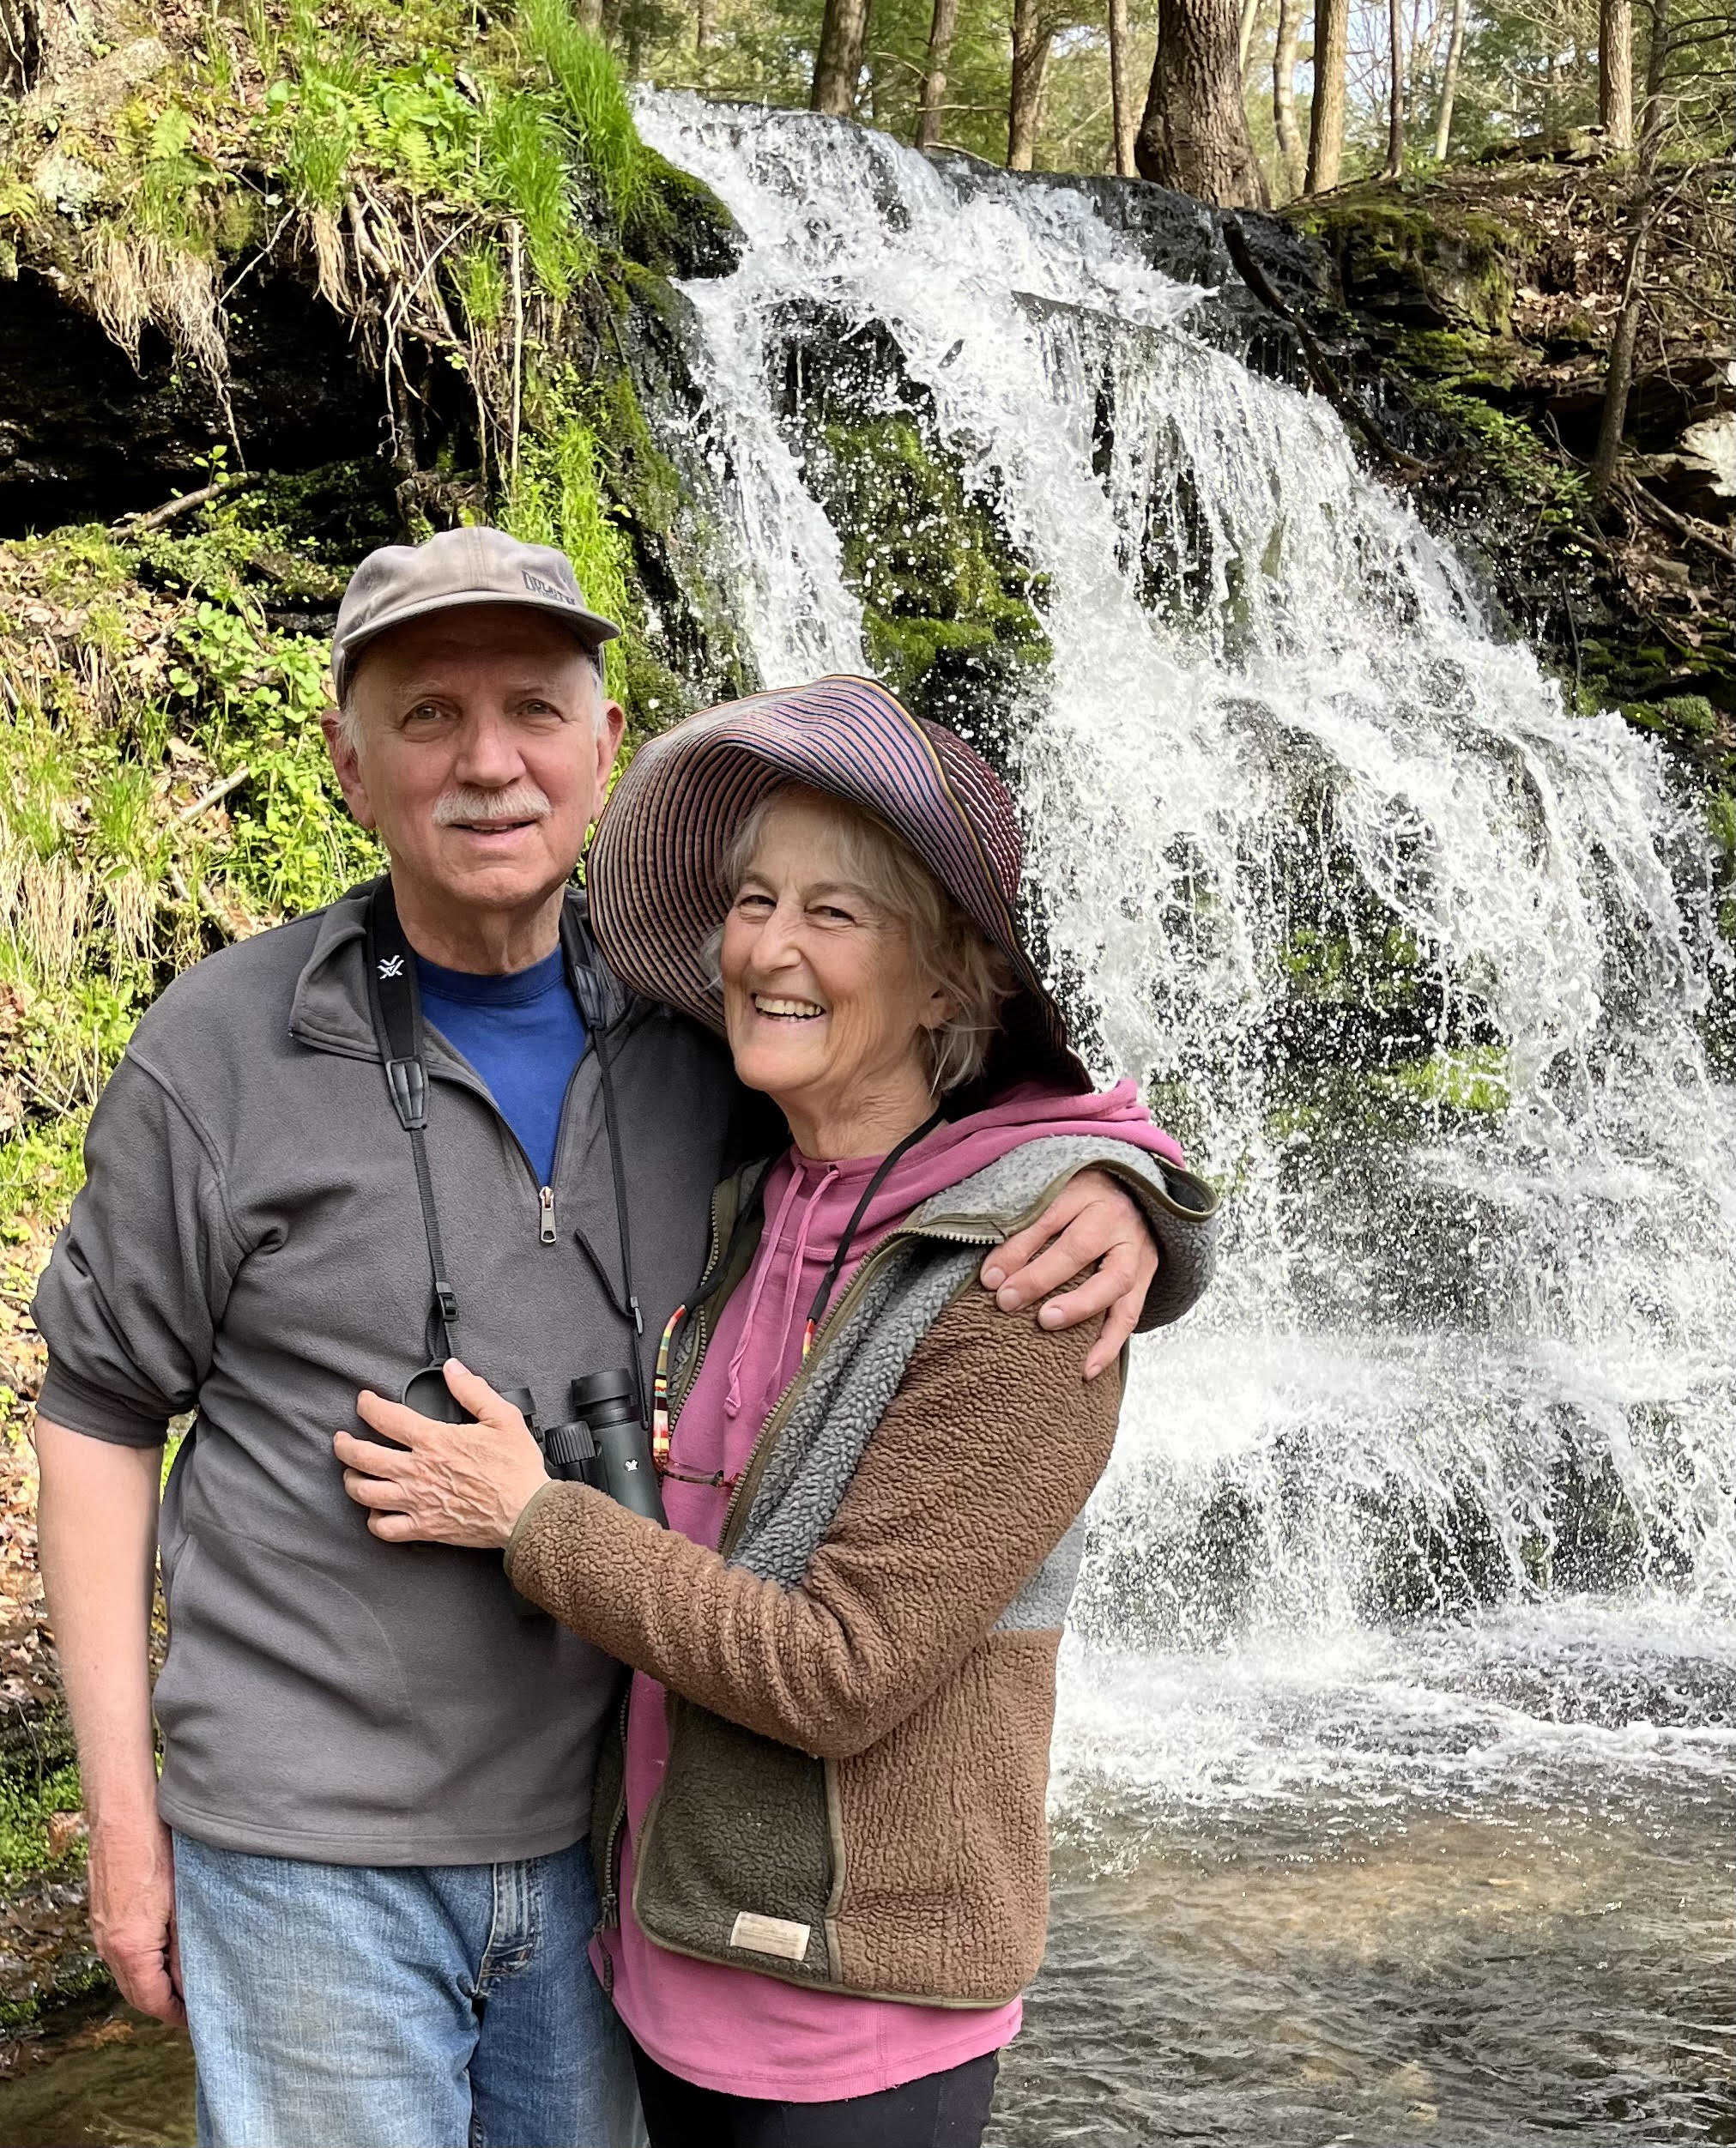 "Folbre stands in front of a waterfall with her partner"